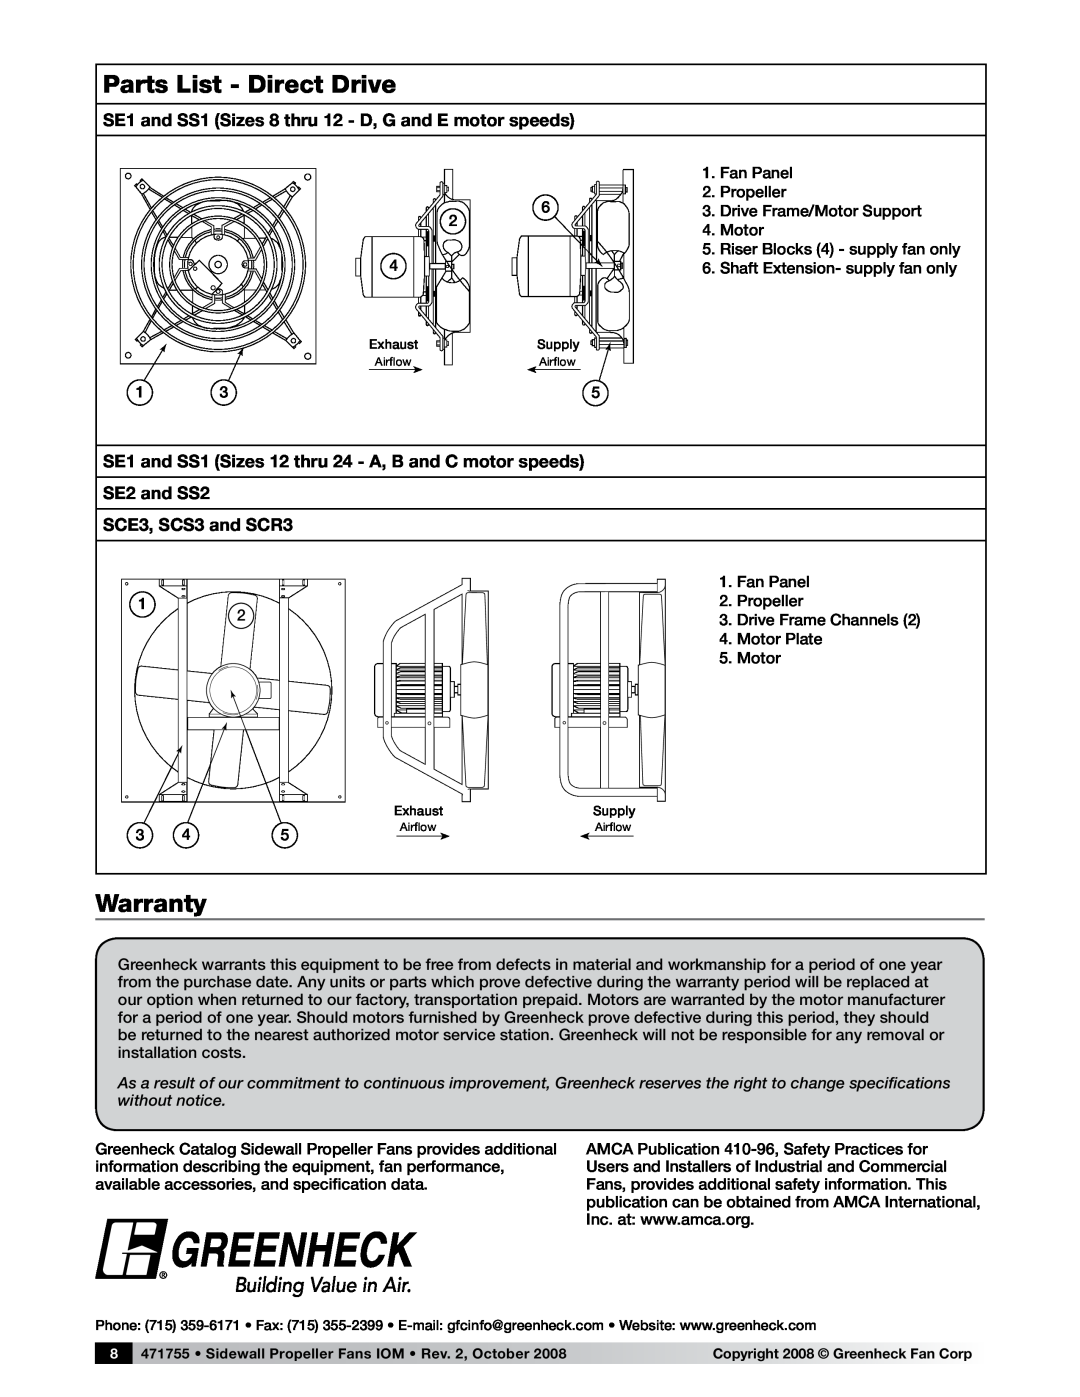 Greenheck Fan PN 471755 manual Parts List - Direct Drive, Warranty, SE1 and SS1 Sizes 8 thru 12 - D, G and E motor speeds 